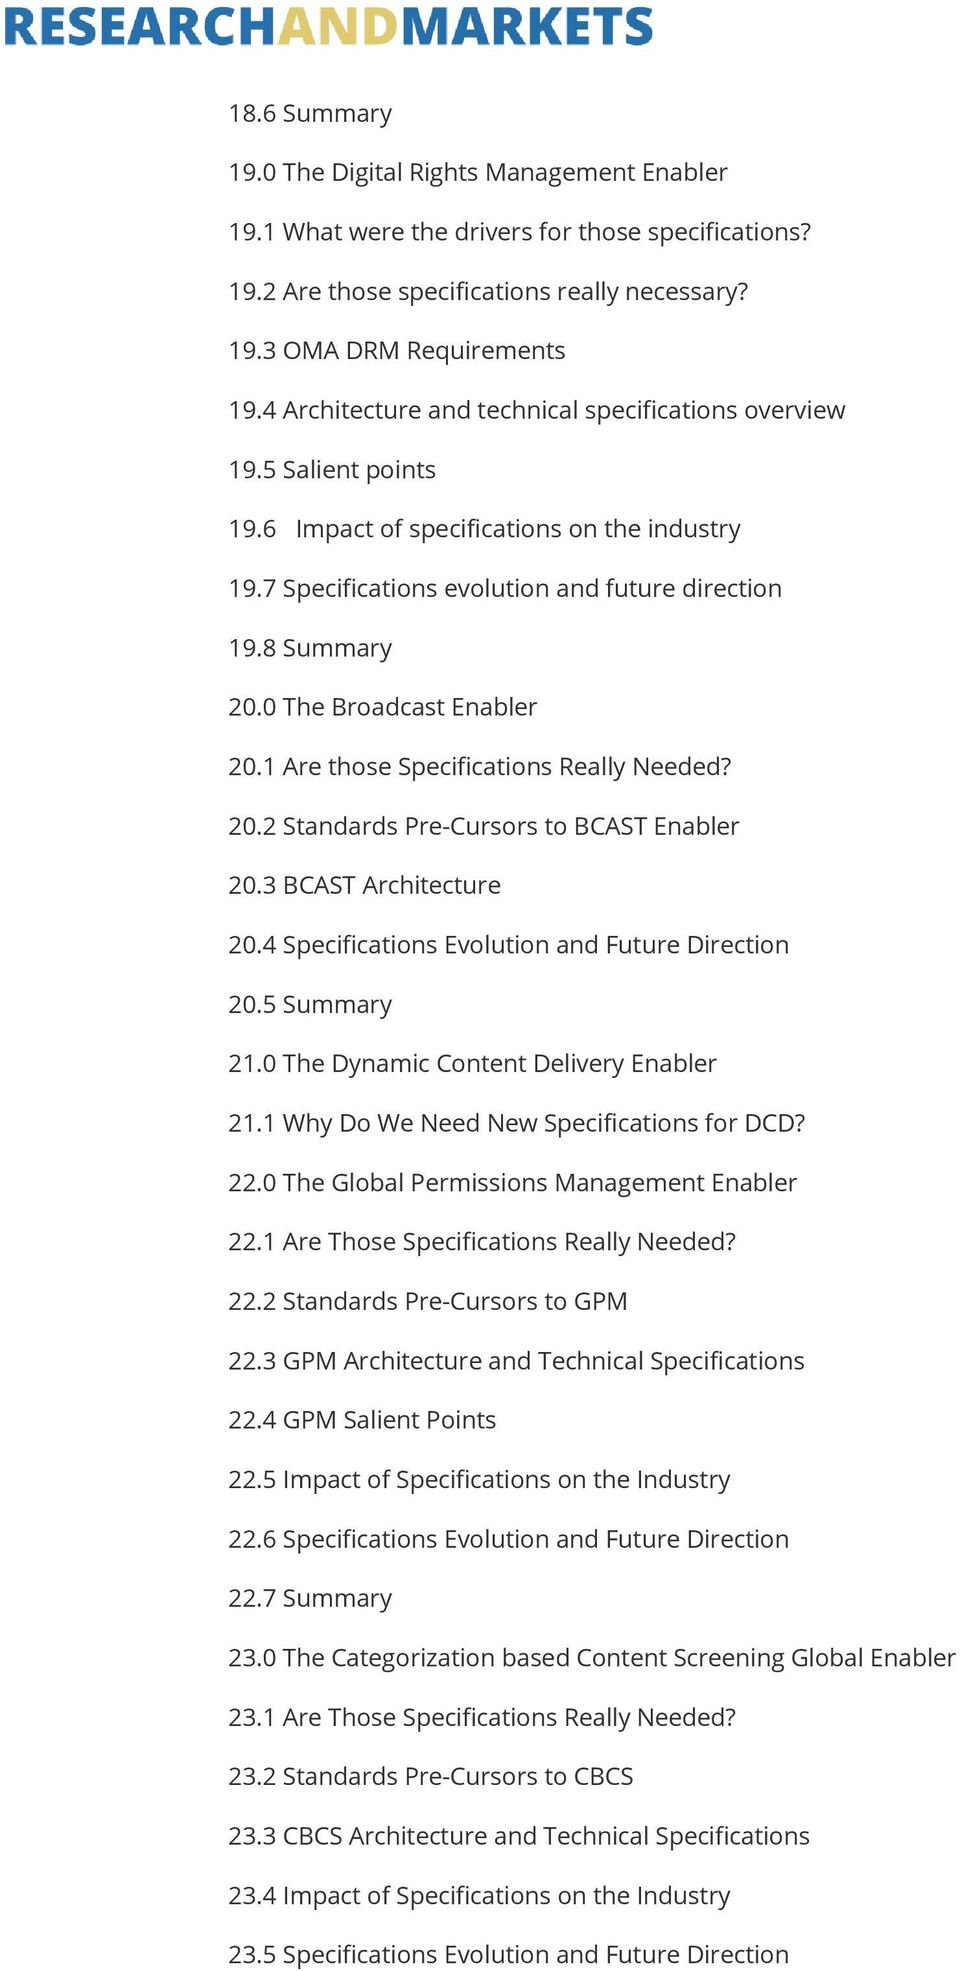 0 The Broadcast Enabler 20.1 Are those Specifications Really Needed? 20.2 Standards Pre-Cursors to BCAST Enabler 20.3 BCAST Architecture 20.4 Specifications Evolution and Future Direction 20.